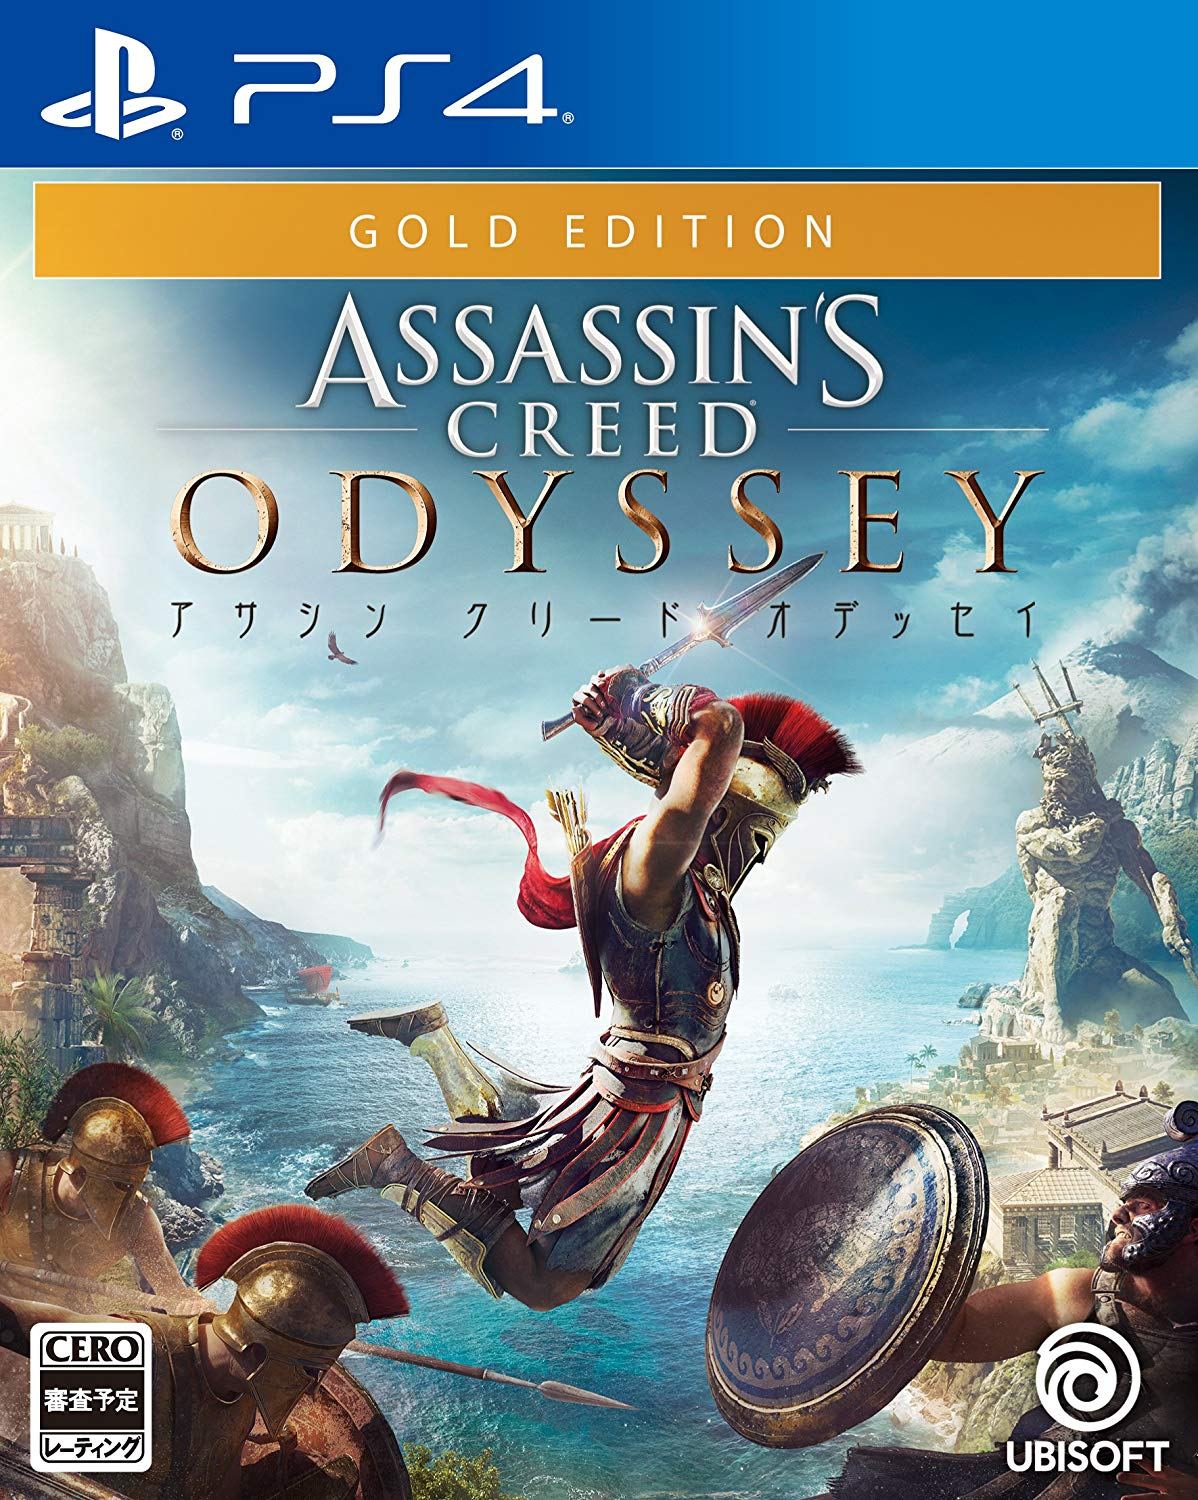 Assassin s creed odyssey editions. Assassin's Creed Odyssey ps4 диск. Assassin's Creed Odyssey Gold Edition ps4 диск. Assassins Одиссея ps4. Assassins Creed Odyssey Gold Edition Xbox one обложка.